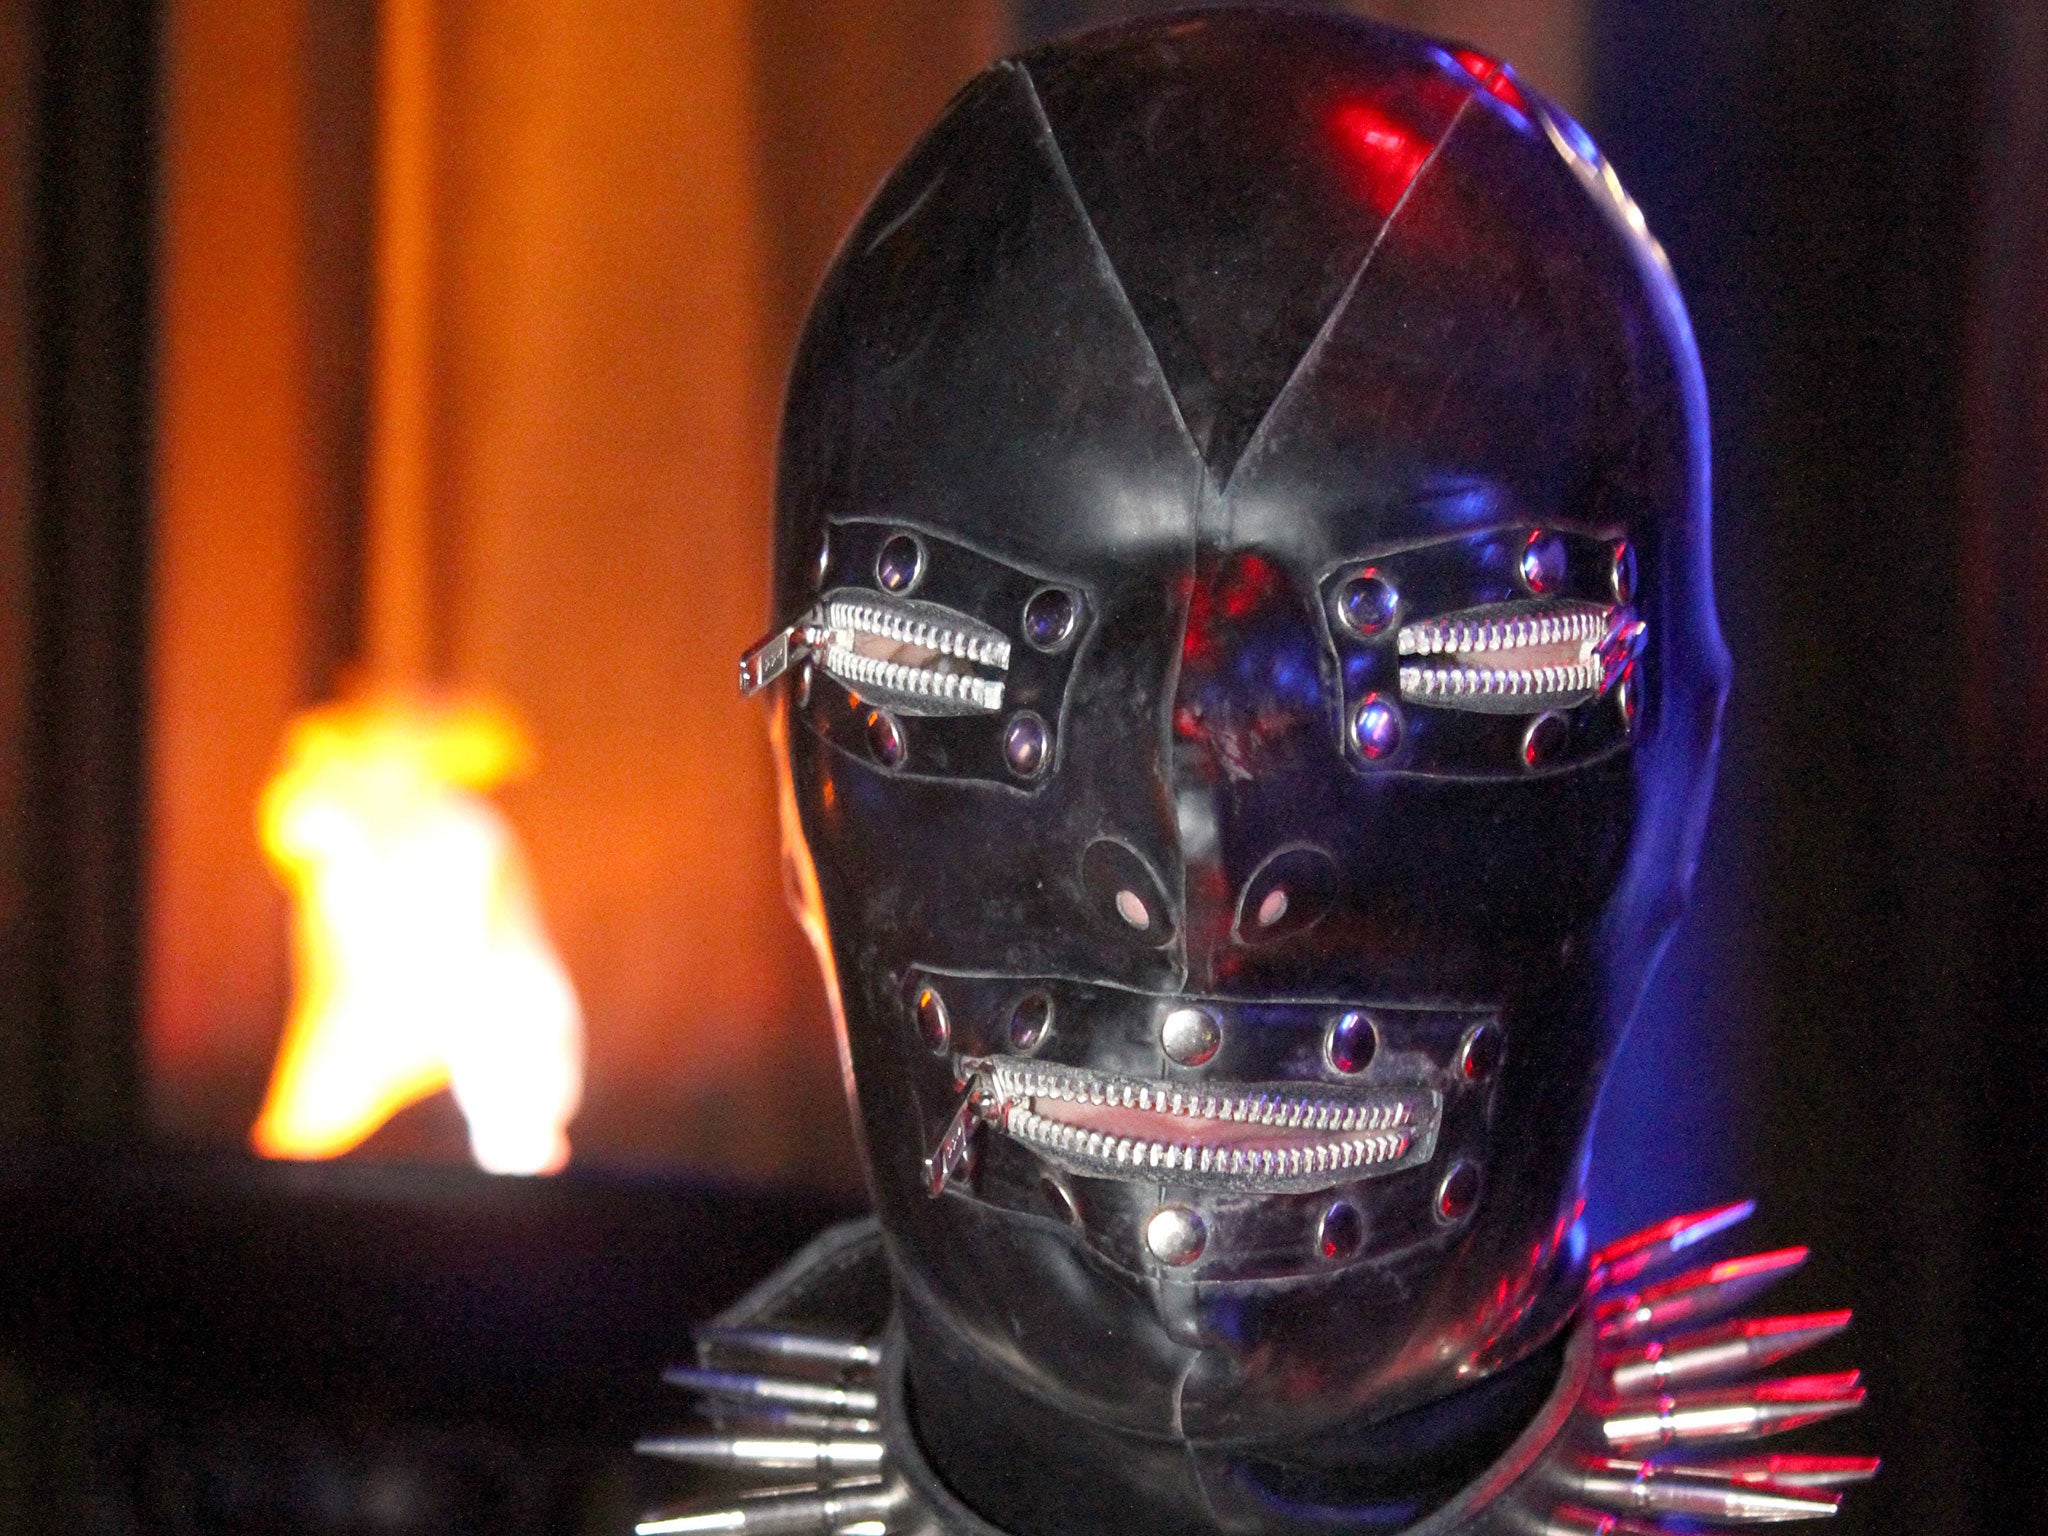 Bondage or “gimp” suits are used by sexually submissive people engaging in BDSM